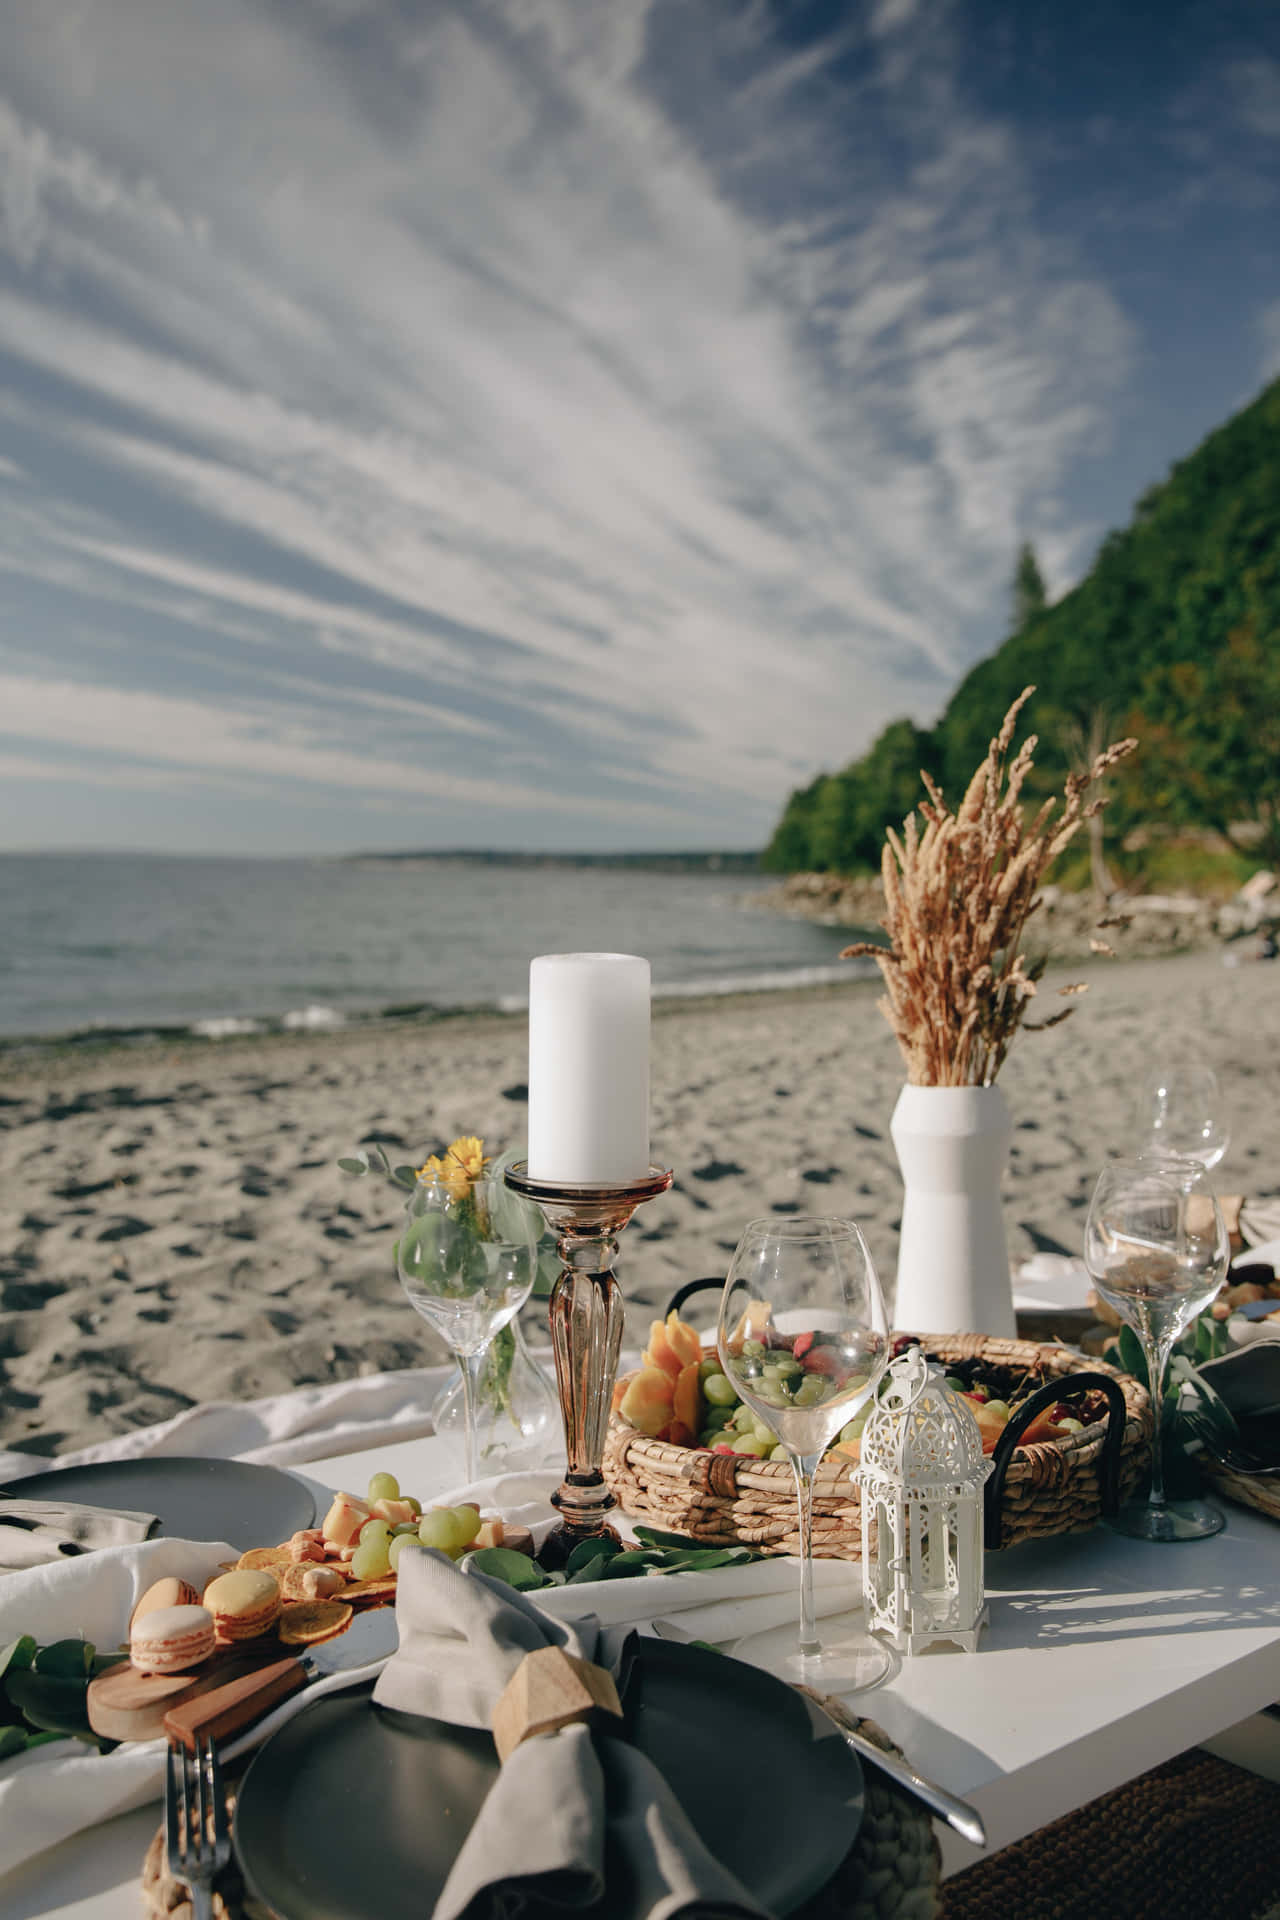 Perfect Beach Picnic Setup on a Sunny Day- Wallpaper